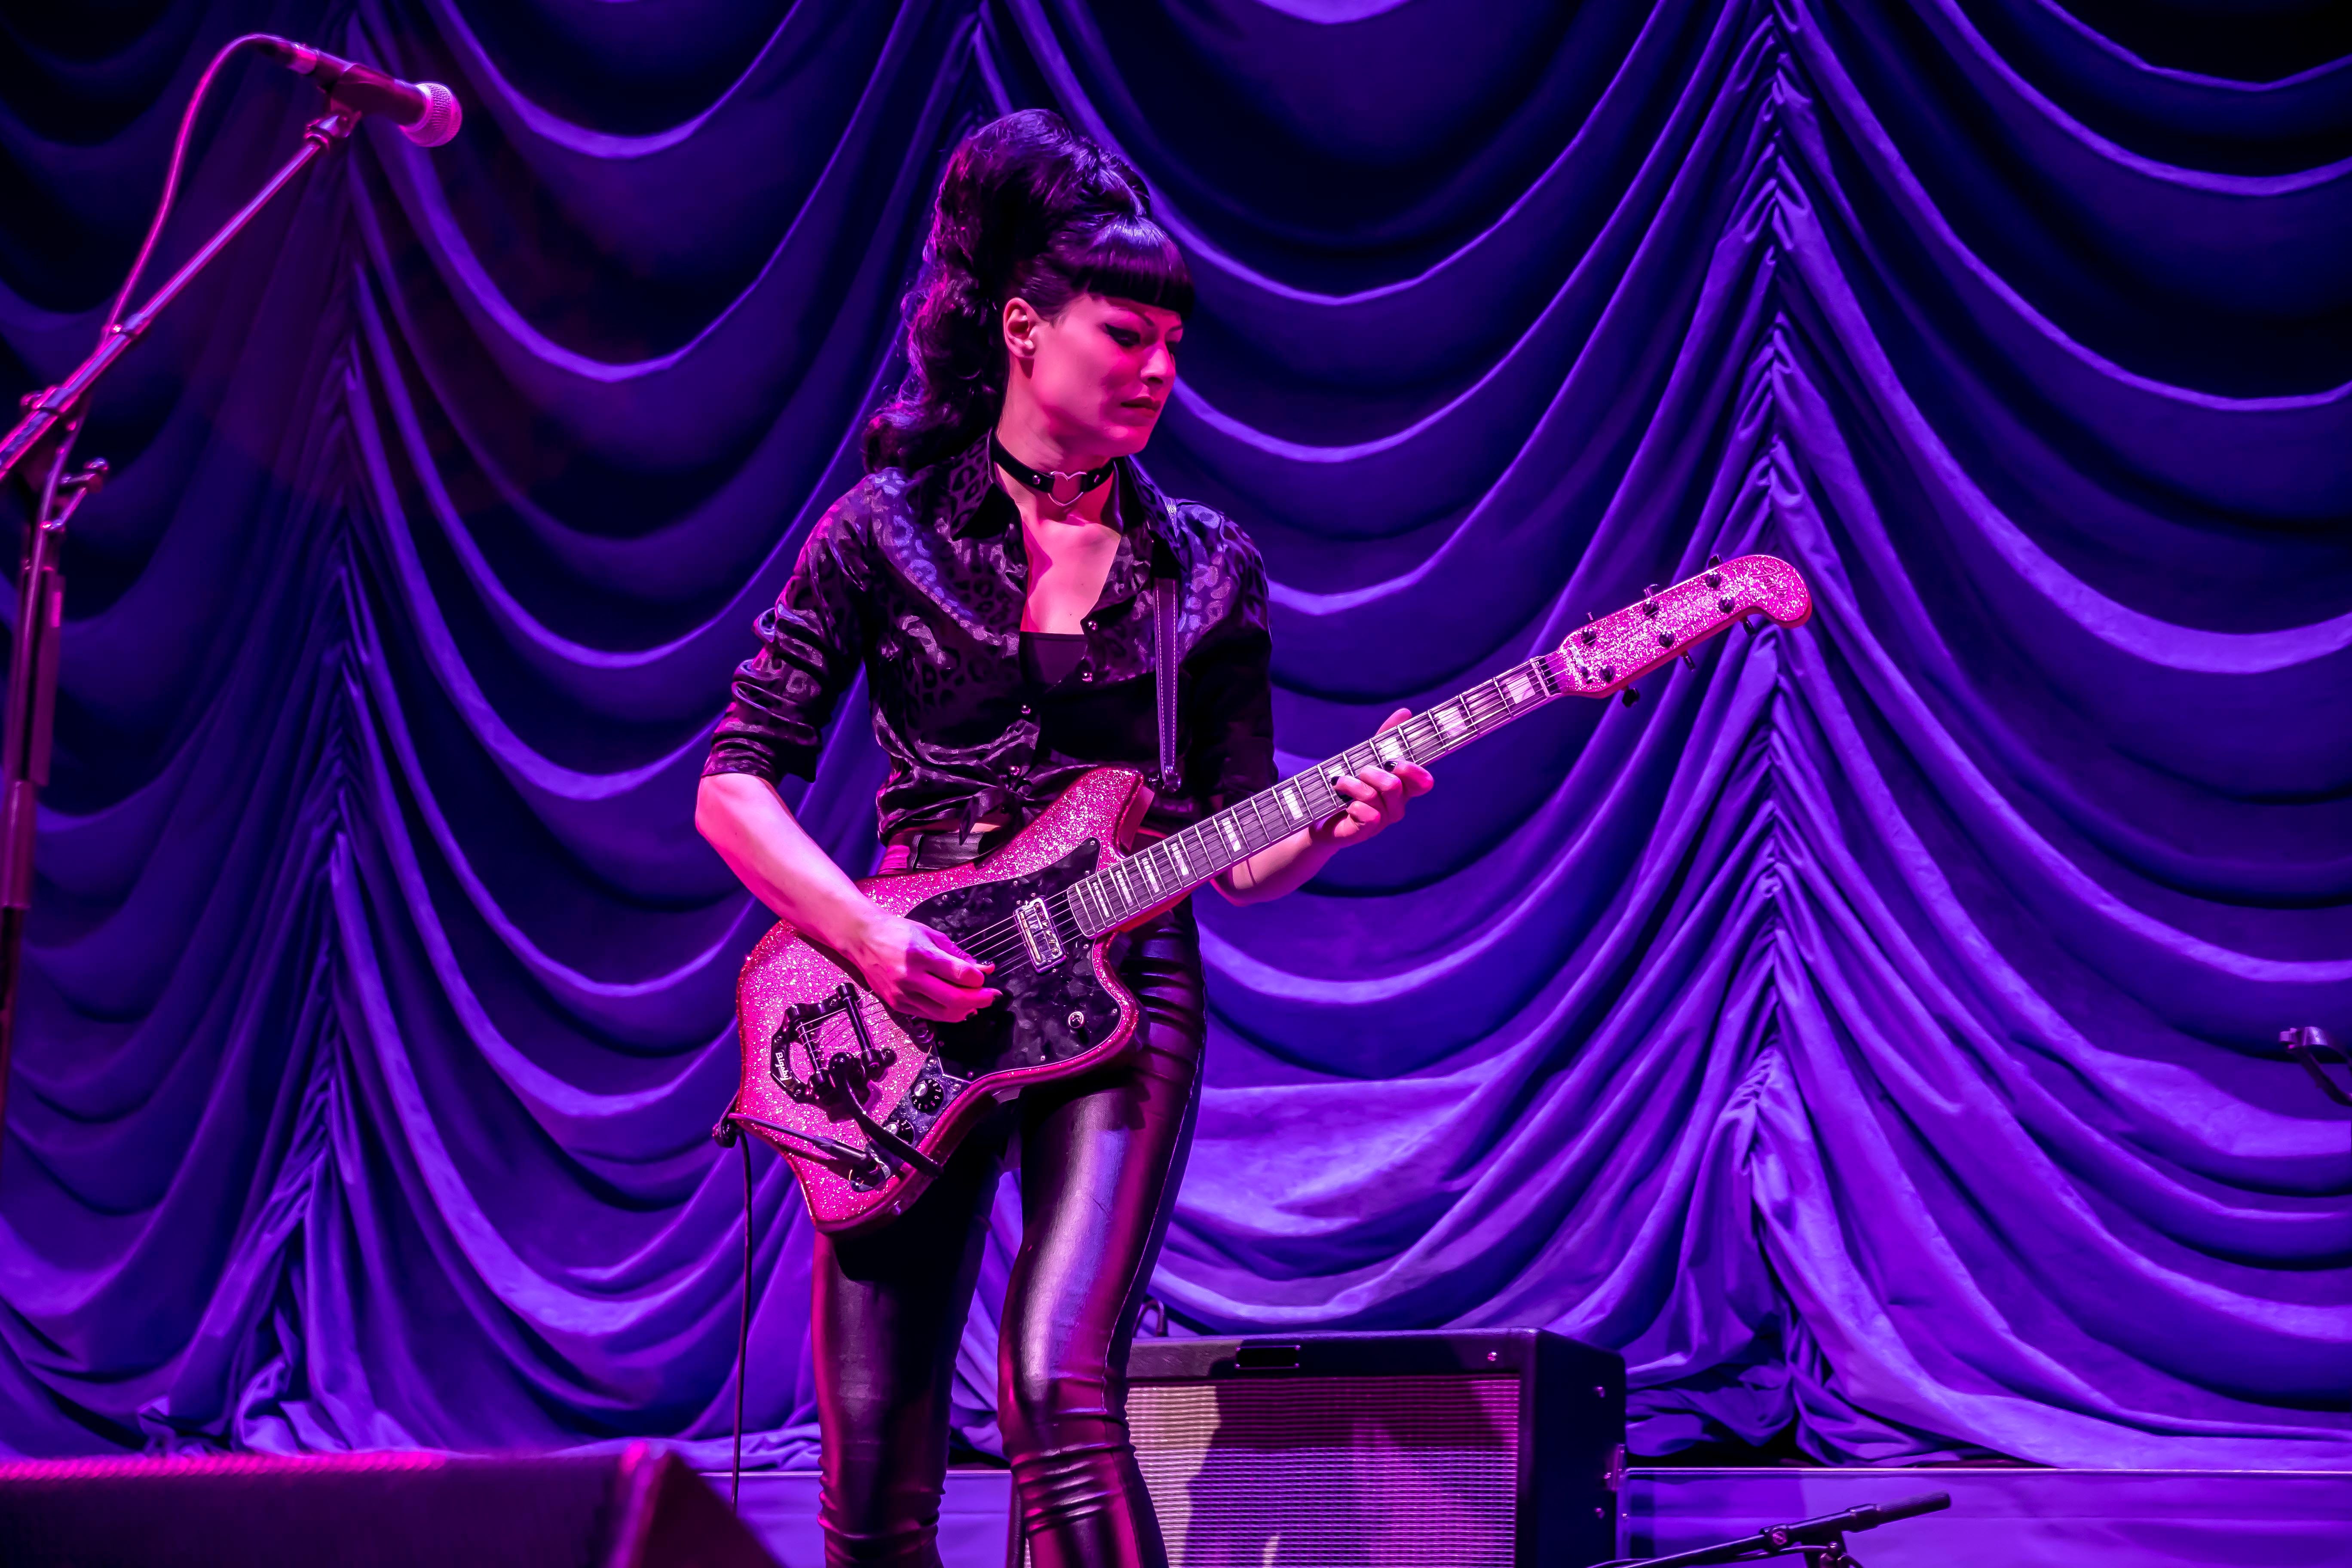 Olivia Jean performs at the historic Masonic Temple before Jack White’s new Supply Chains Issues Tour on April 8, 2022 in Detroit, Michigan. (Photo by Dave Reginek-Special to The Detroit News)